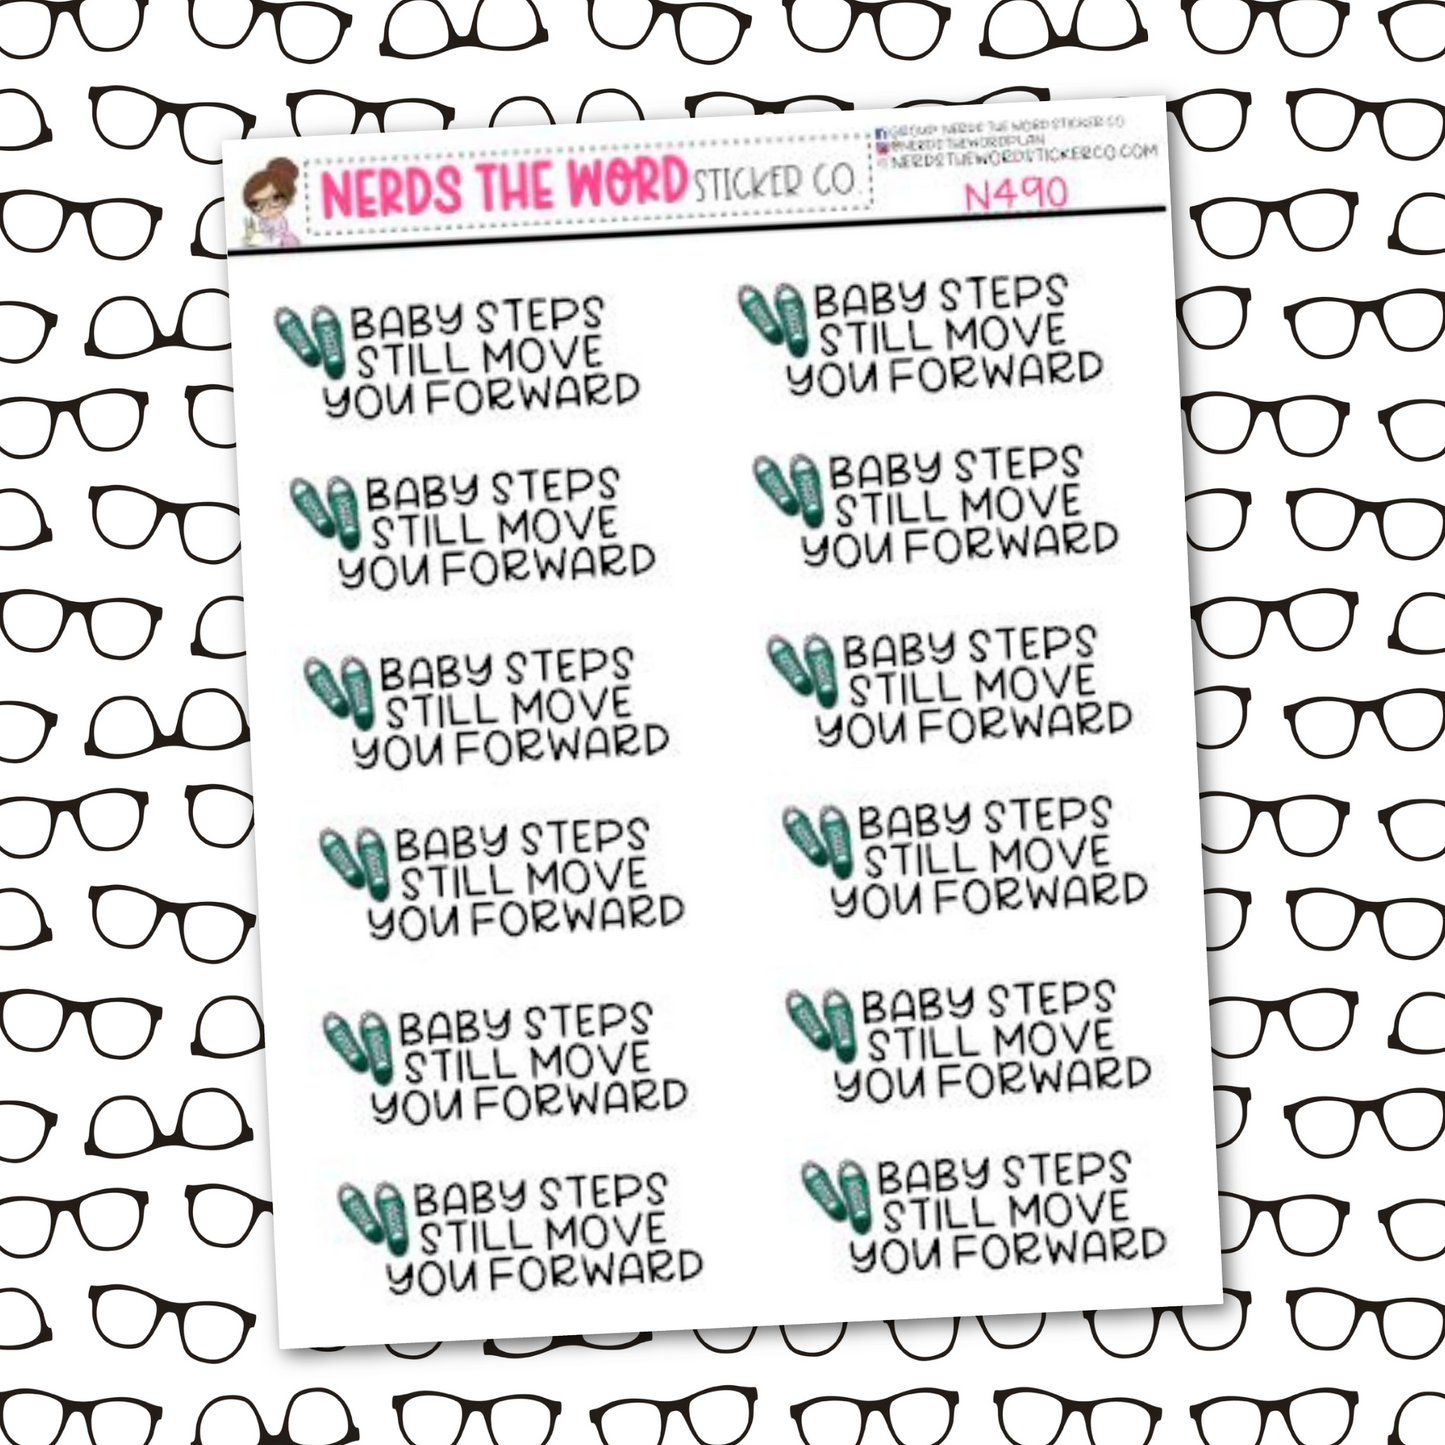 Baby Steps Quote Sticker Sheet